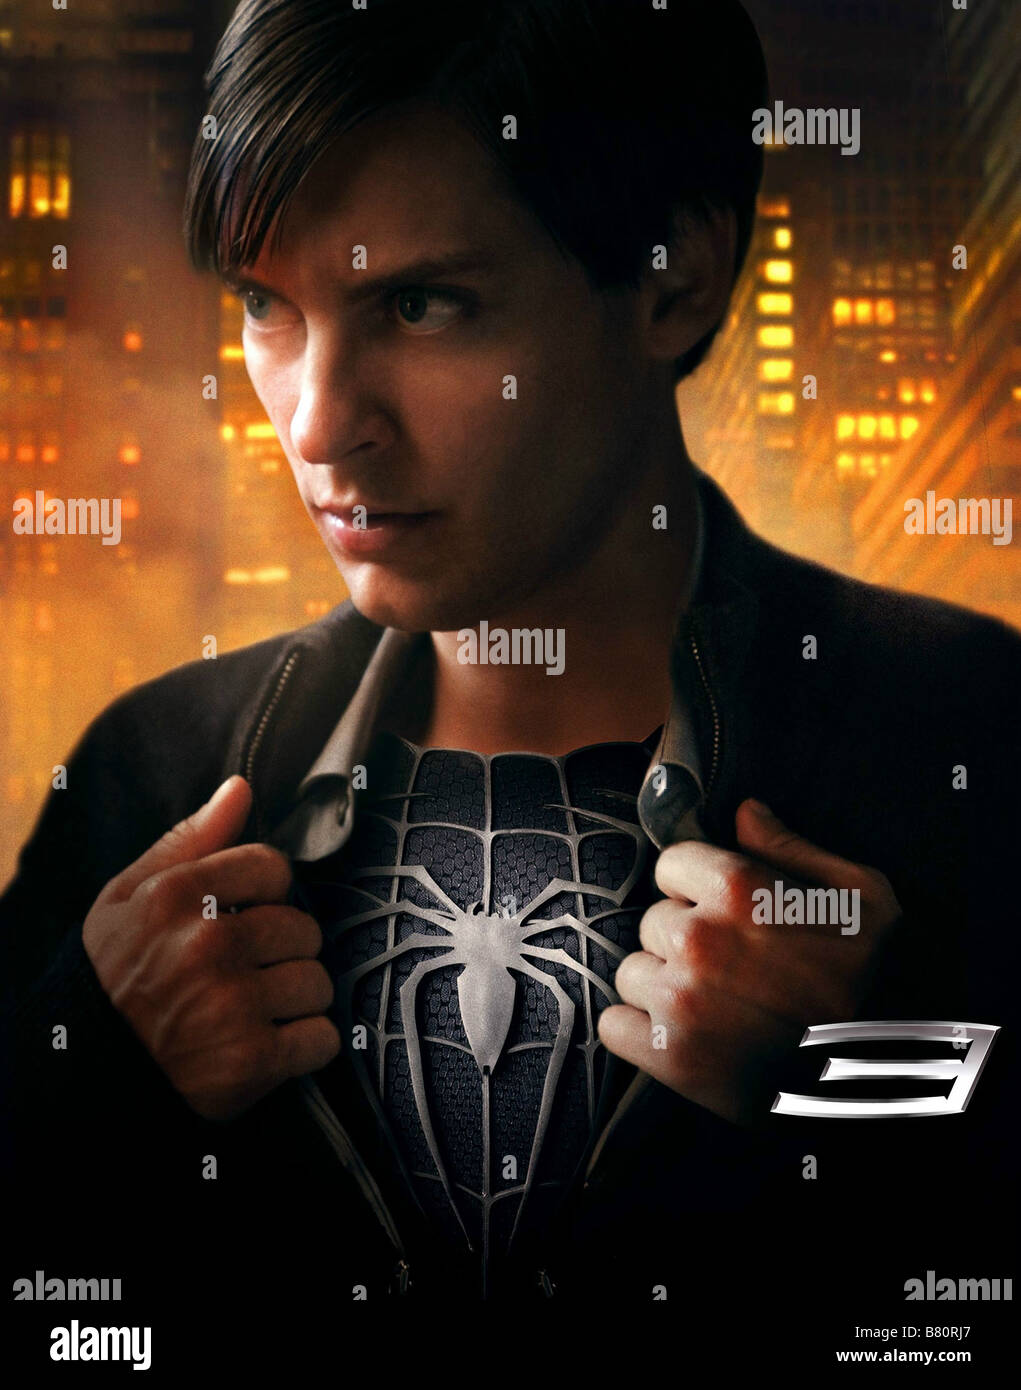 Spider man 3 Year: 2007 USA Affiche / Poster Tobey Maguire Director: Sam  Raimi Stock Photo - Alamy